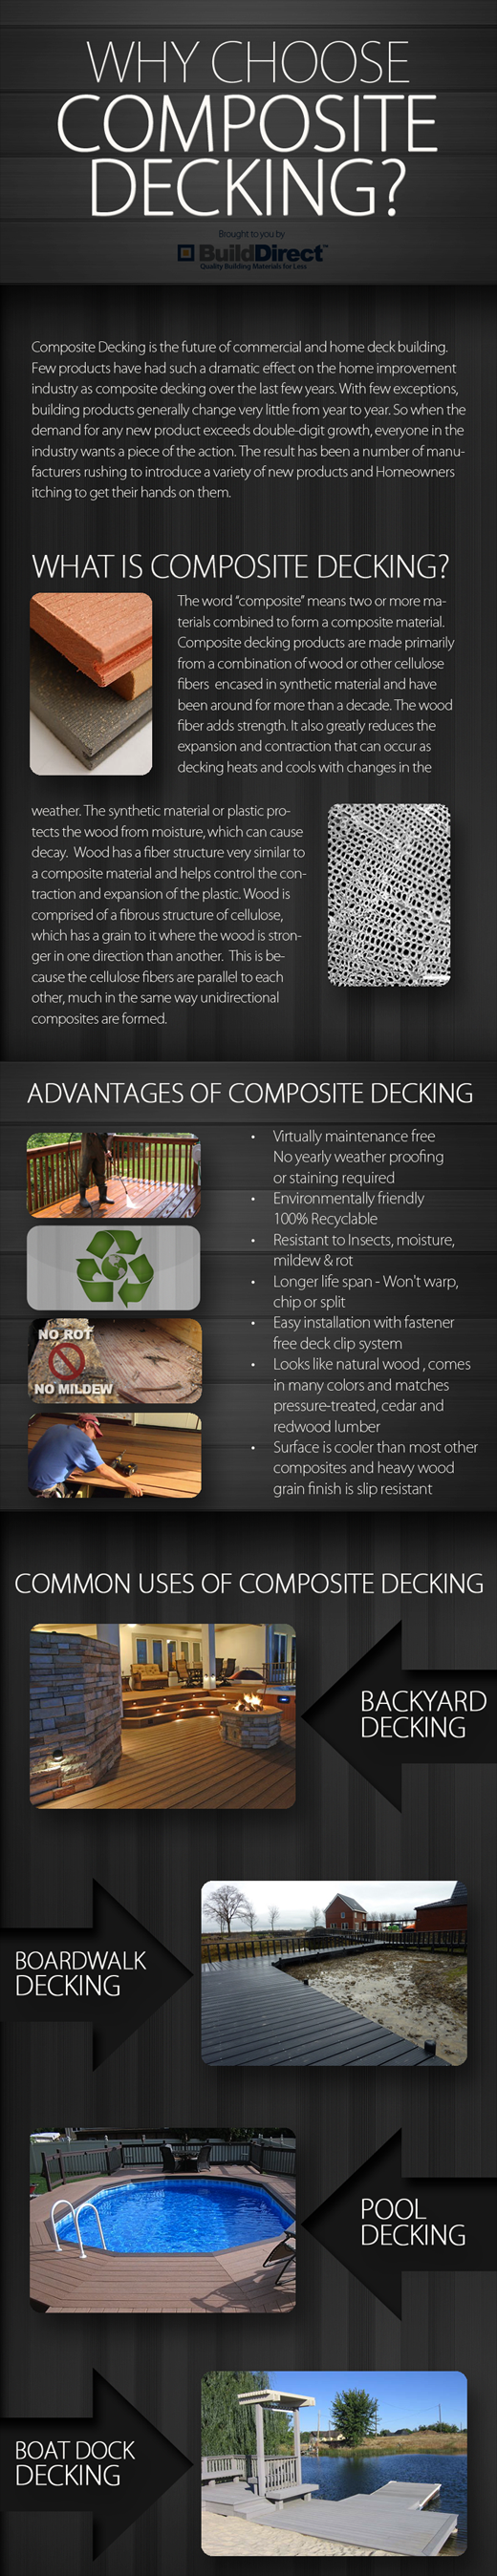 What, exactly, IS composite decking?